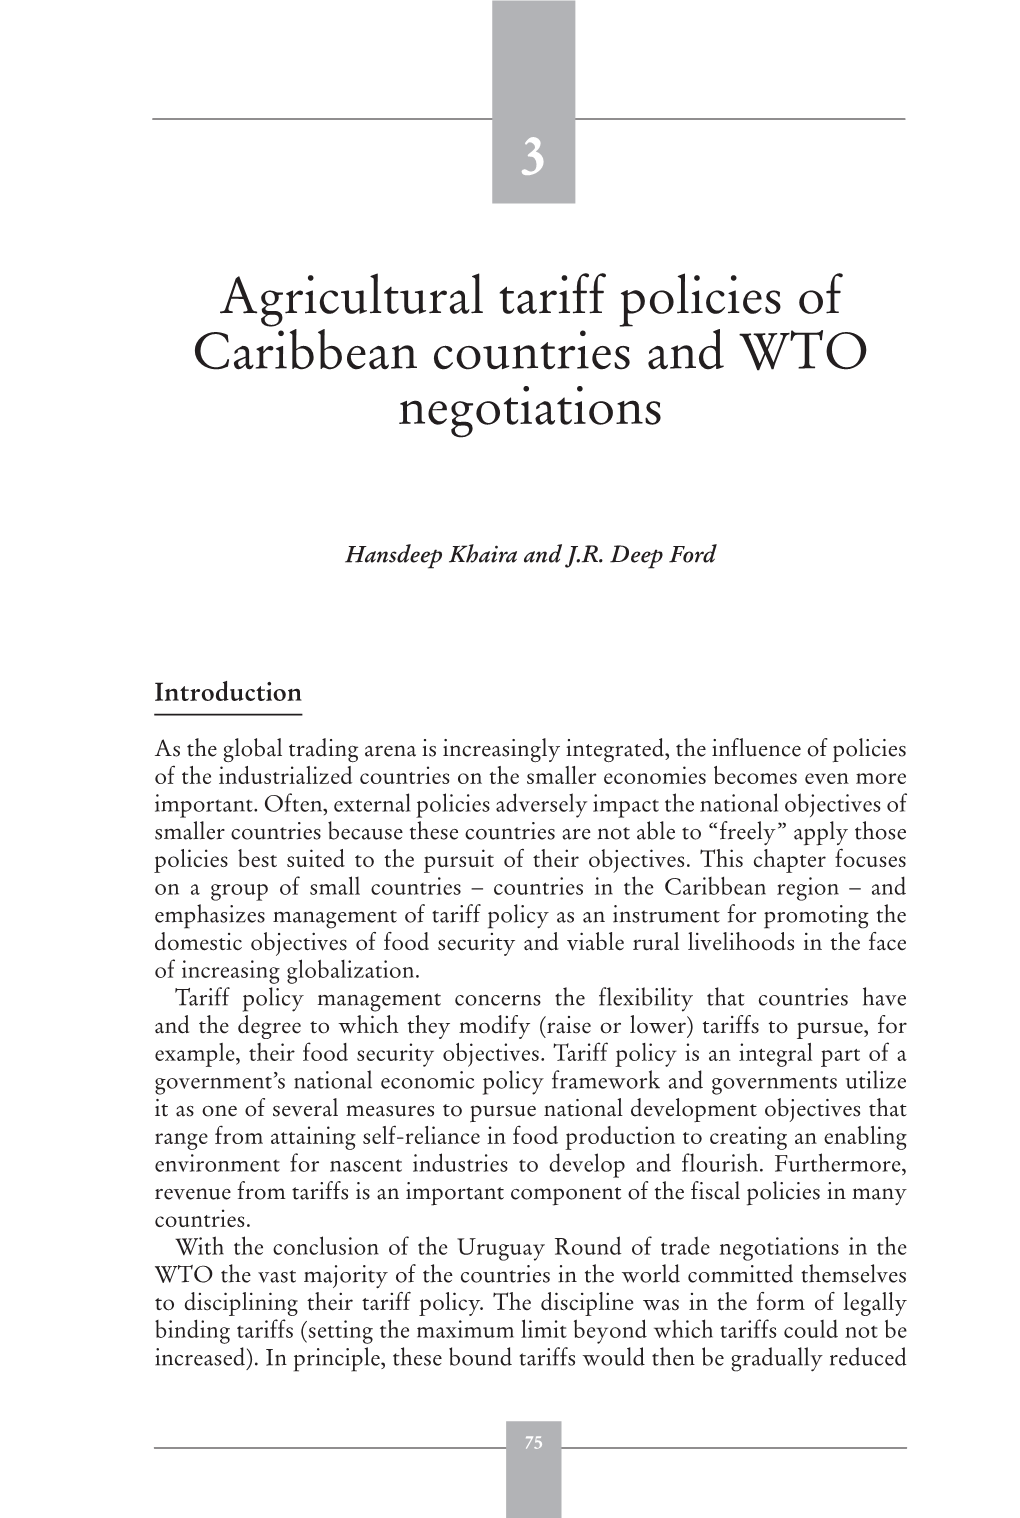 Agricultural Tariff Policies of Caribbean Countries and WTO Negotiations